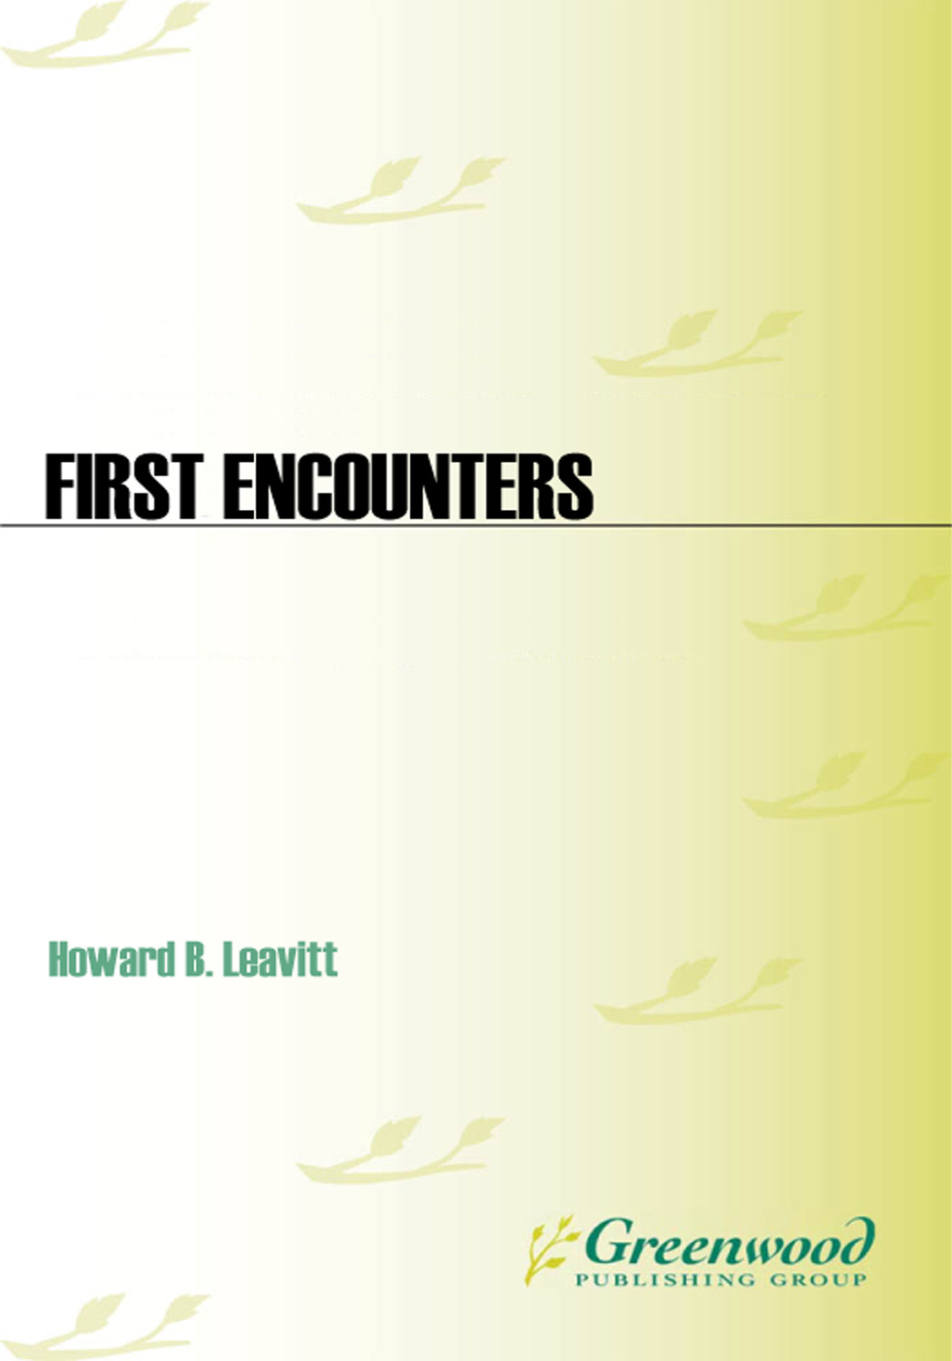 First Encounters: Native Voices on the Coming of the Europeans page Cover1